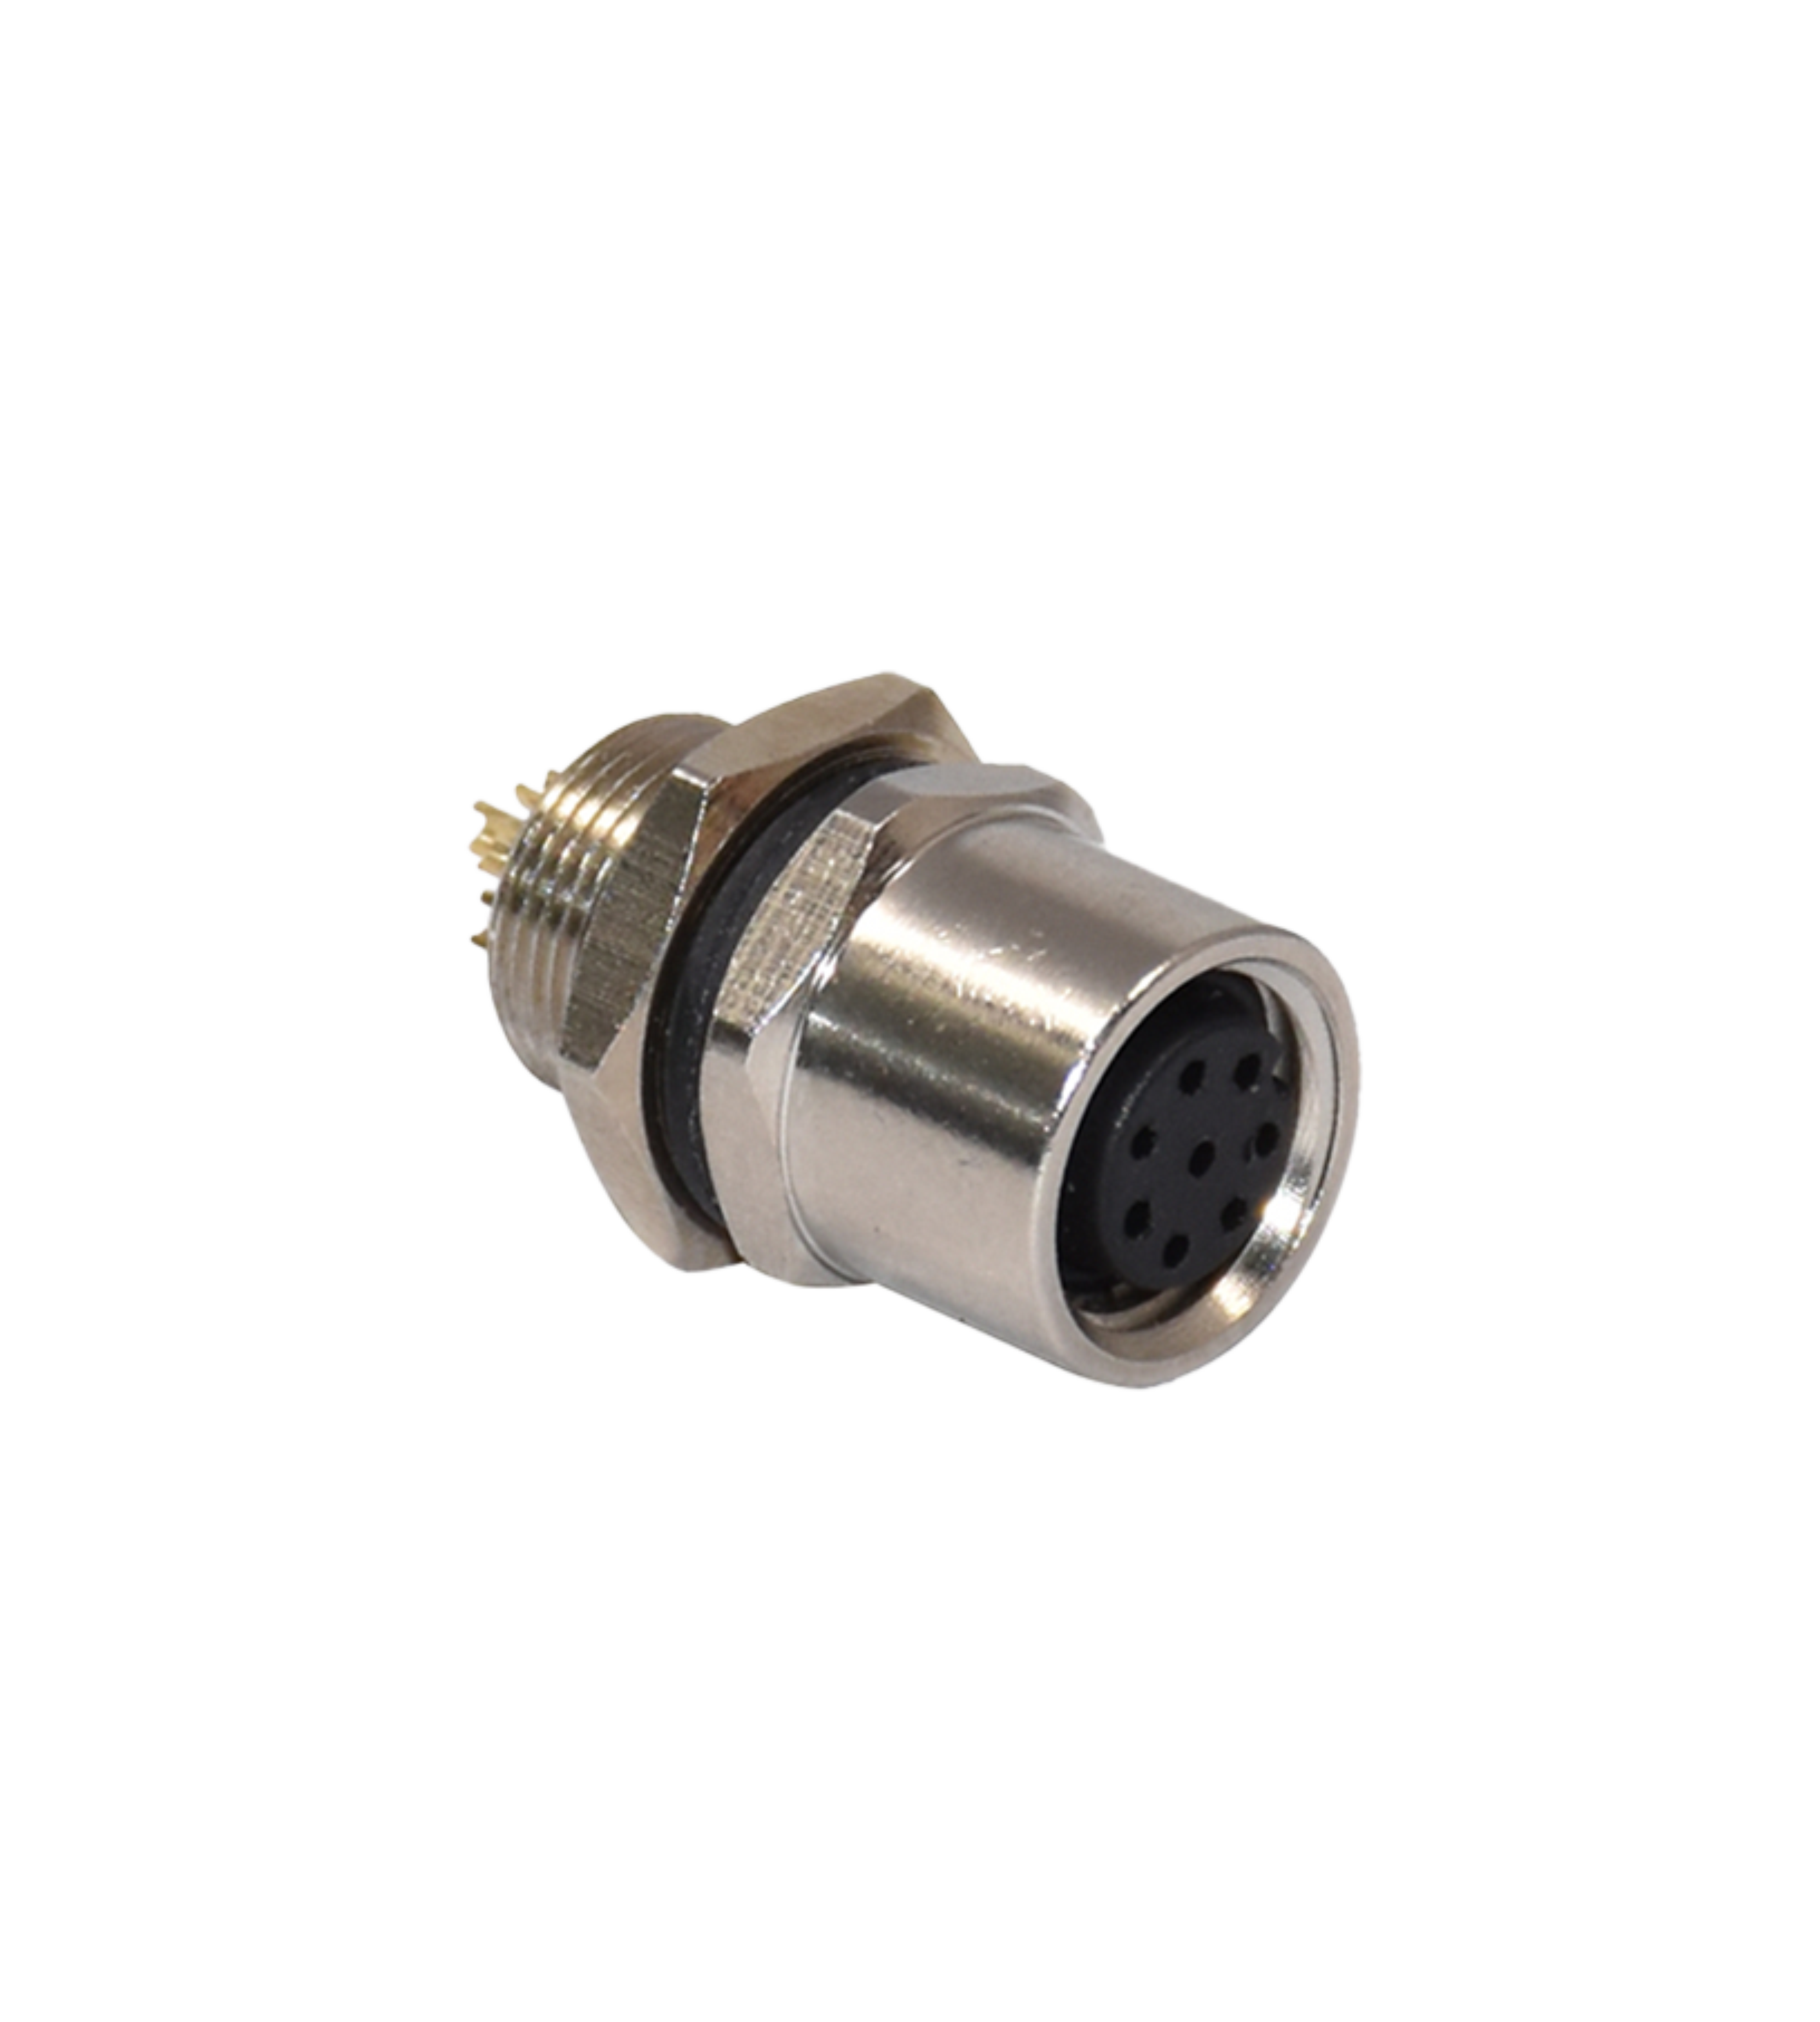 Rigoal M8 Connectors: Precision Engineering for Robust Industrial Solutions